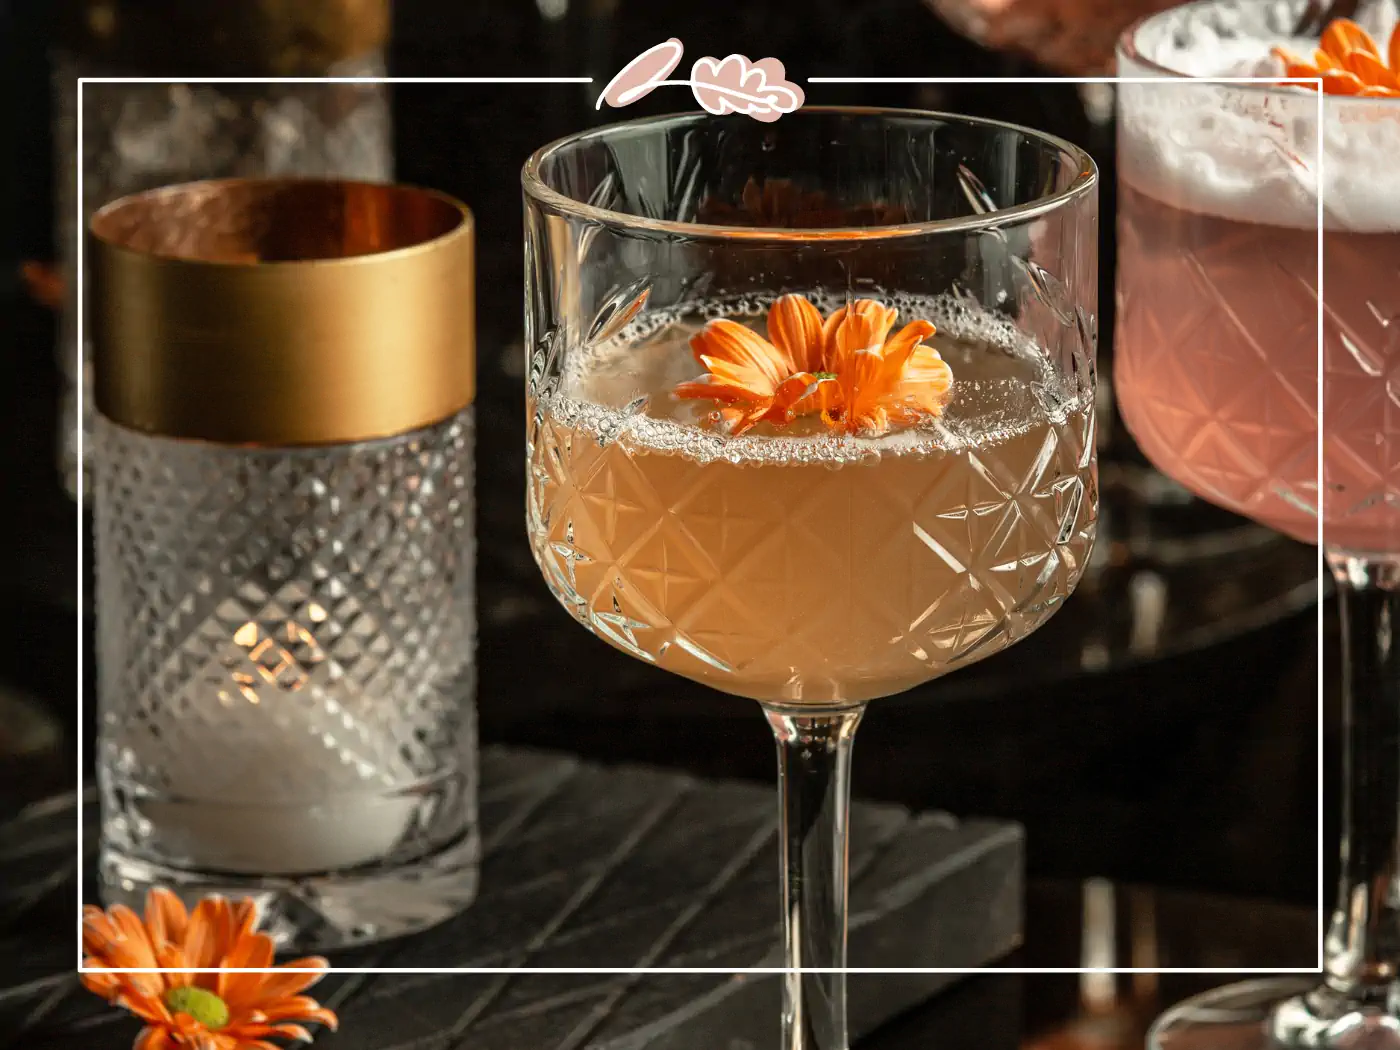 Elegant cocktail glass with a drink garnished with an edible orange flower. Fabulous Flowers and Gifts.